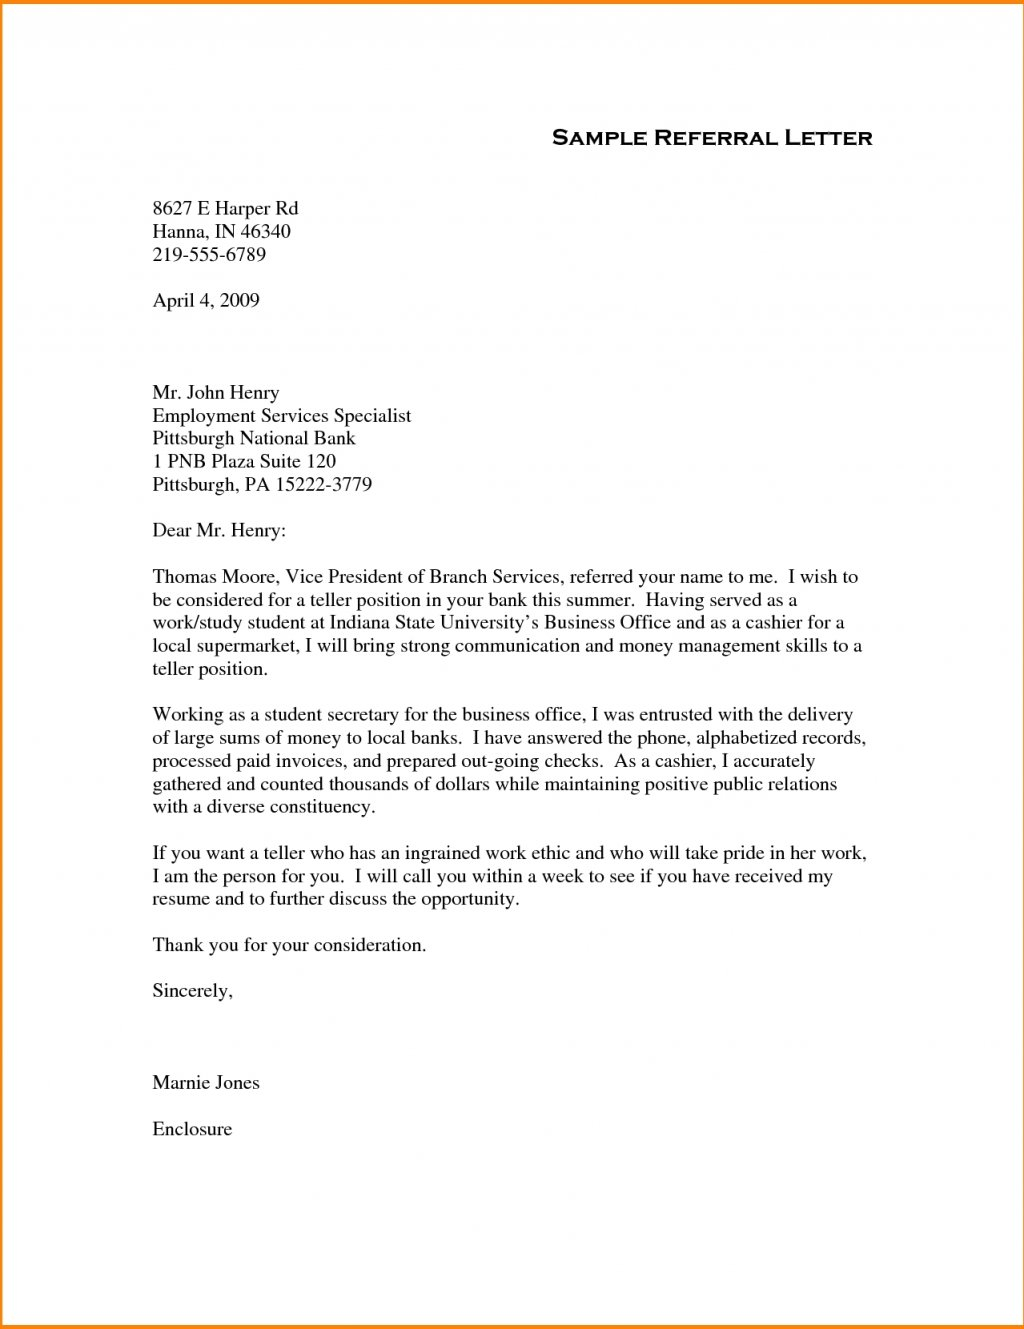 Medical Consult Letter Template - Sample Business Letter Templates Medical School Fundraising Medical